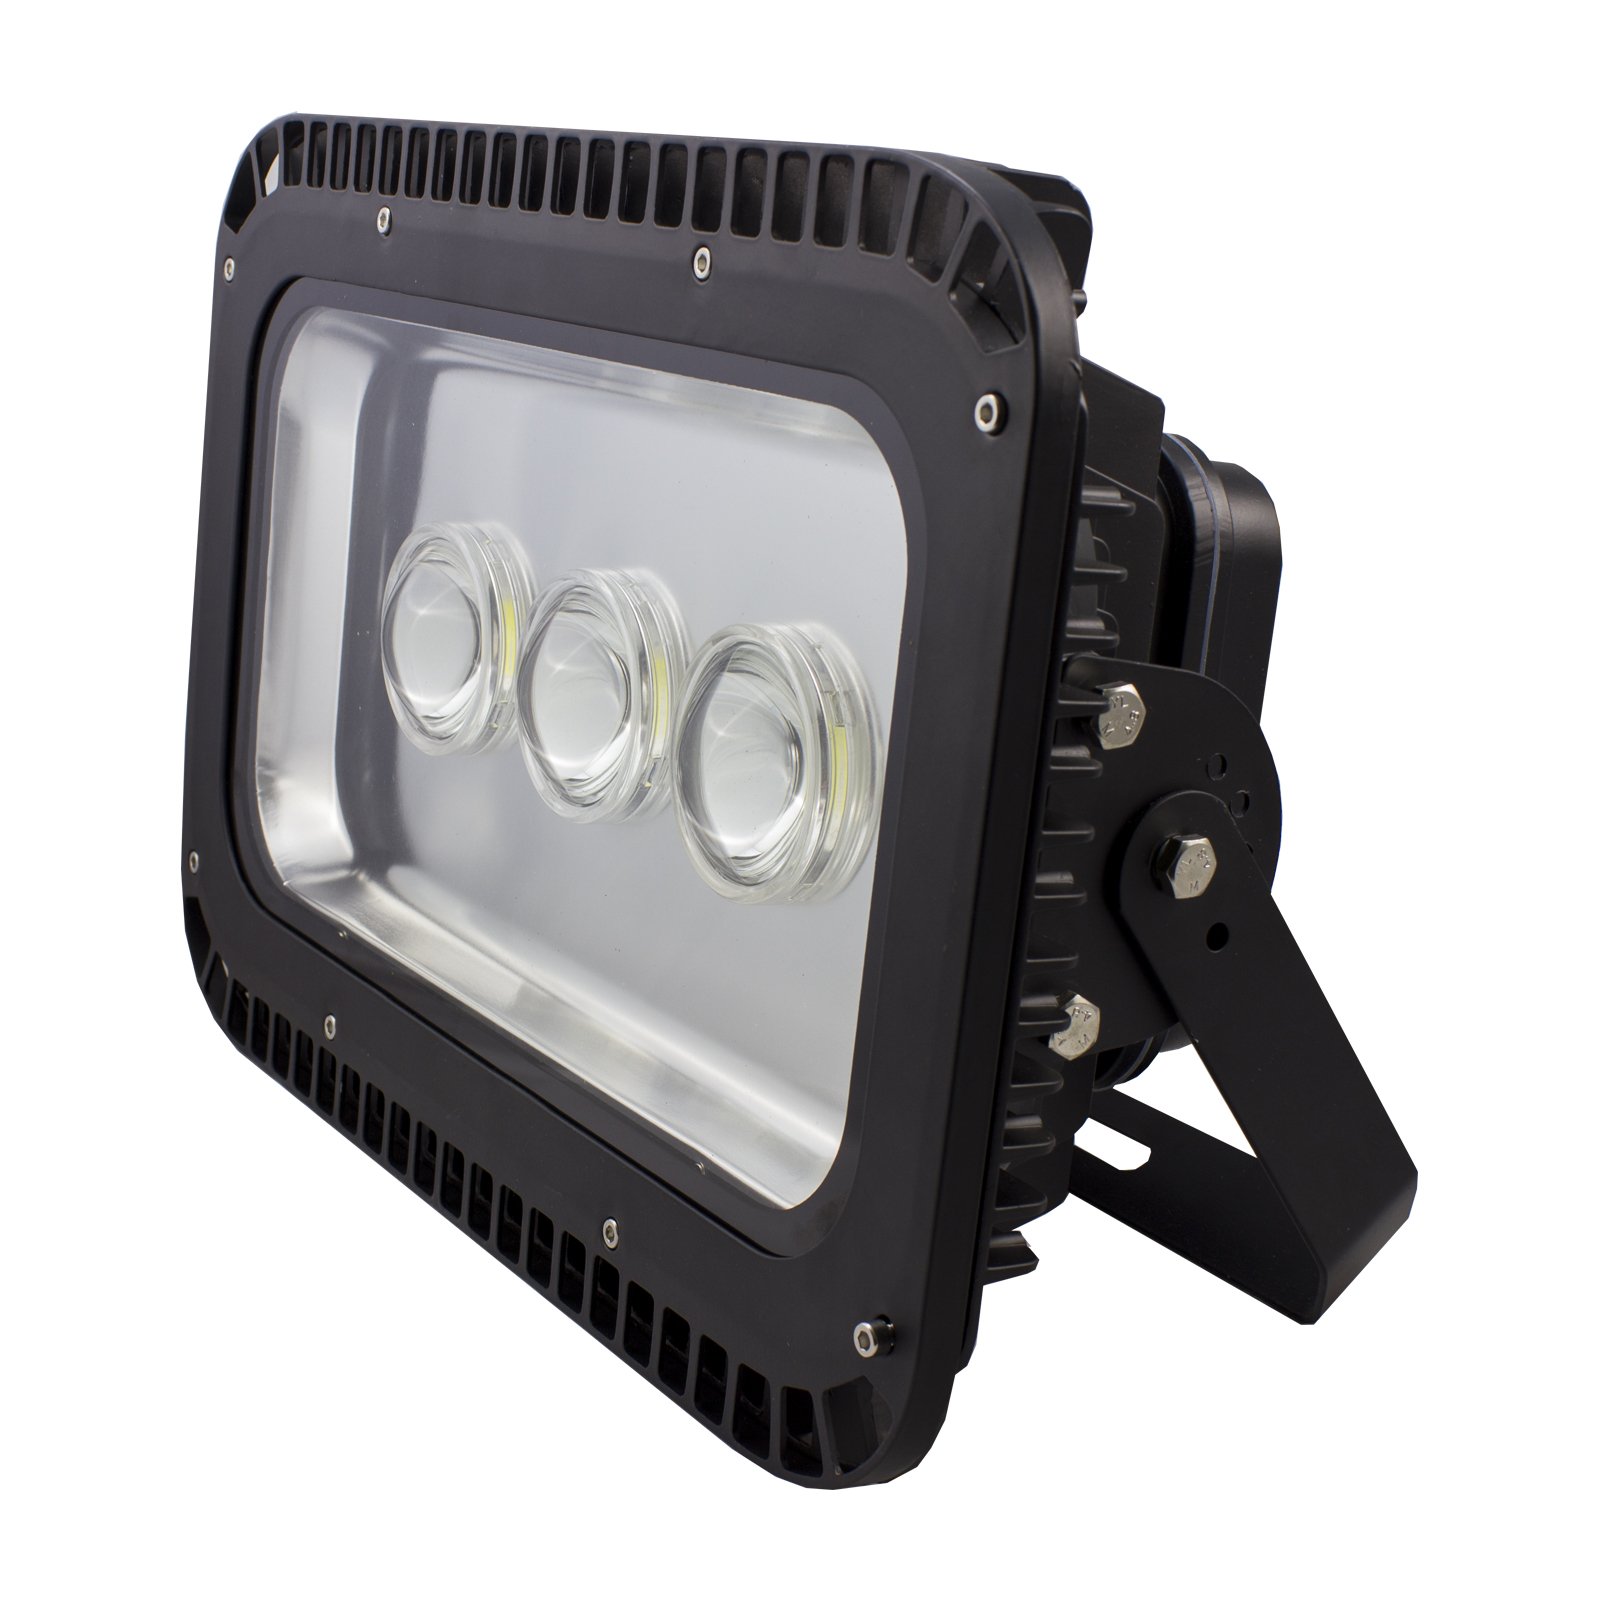 Proyector led 150W plano serie